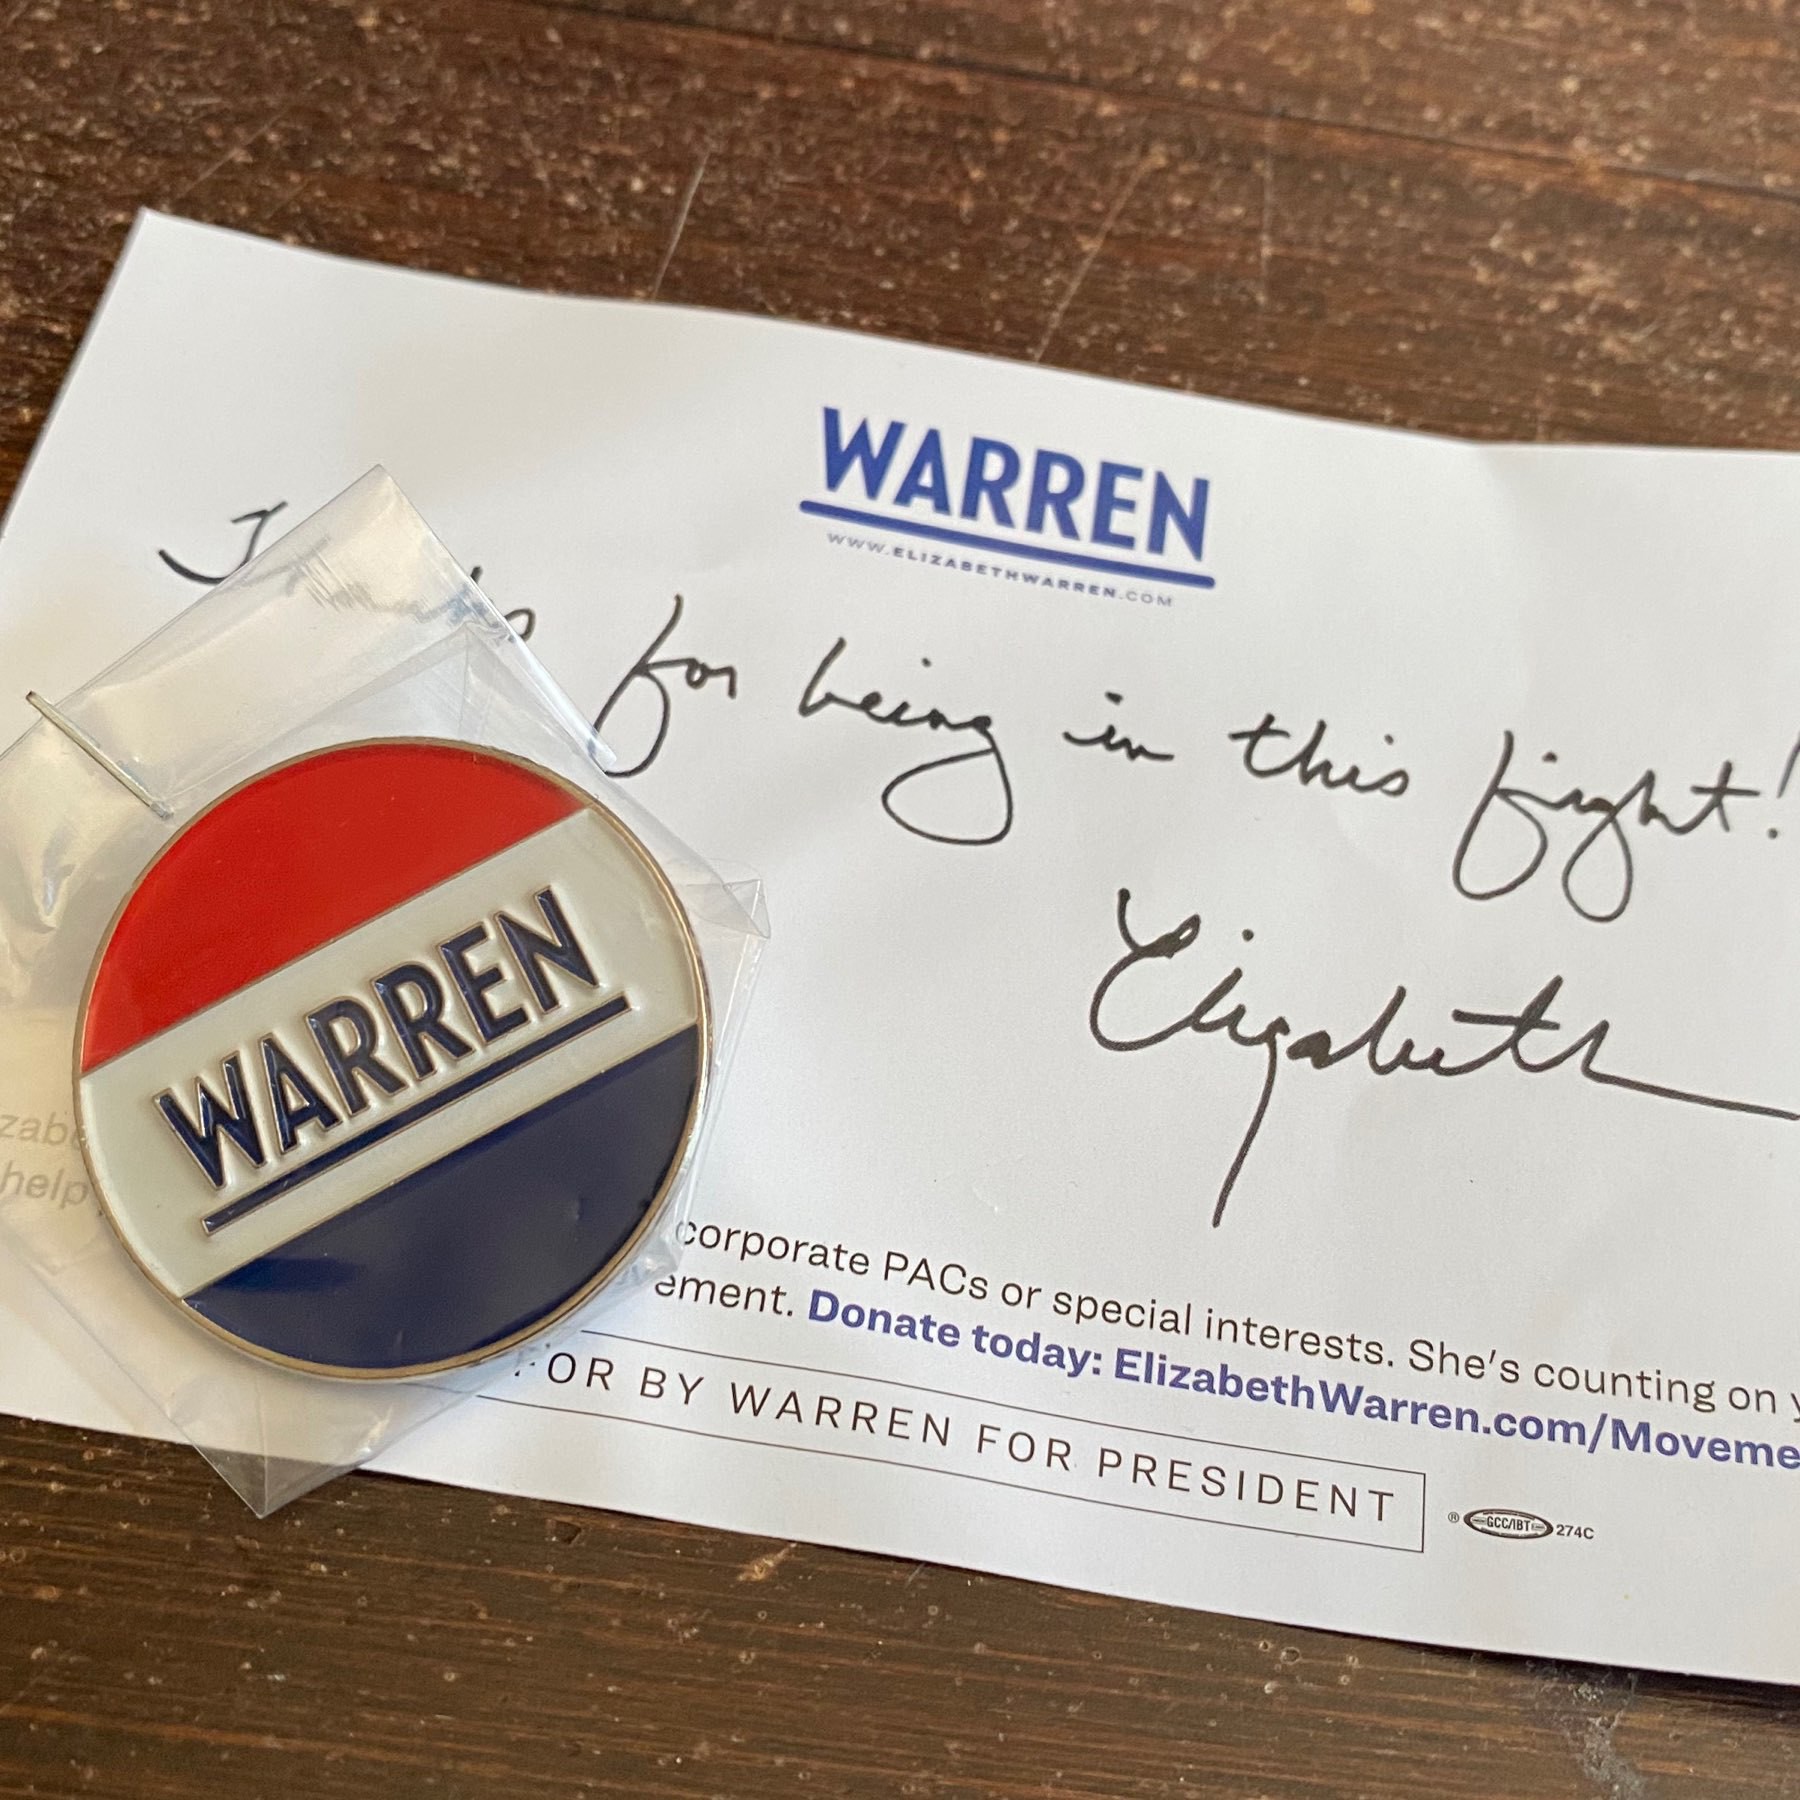 thank you note and enameled pin from Warren for president